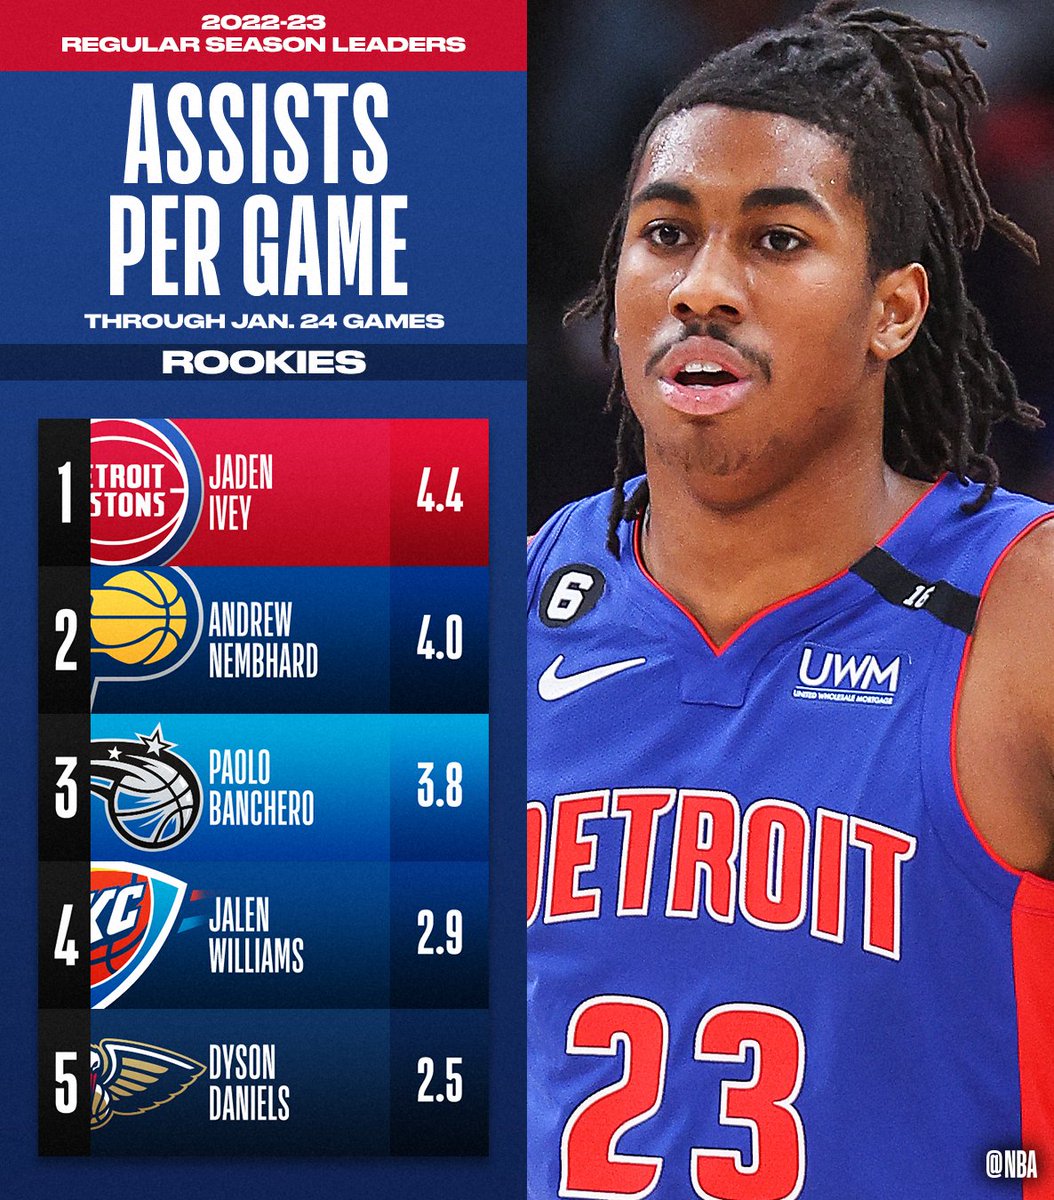 on Twitter "The TOTAL ASSISTS and ASSISTS PER GAME